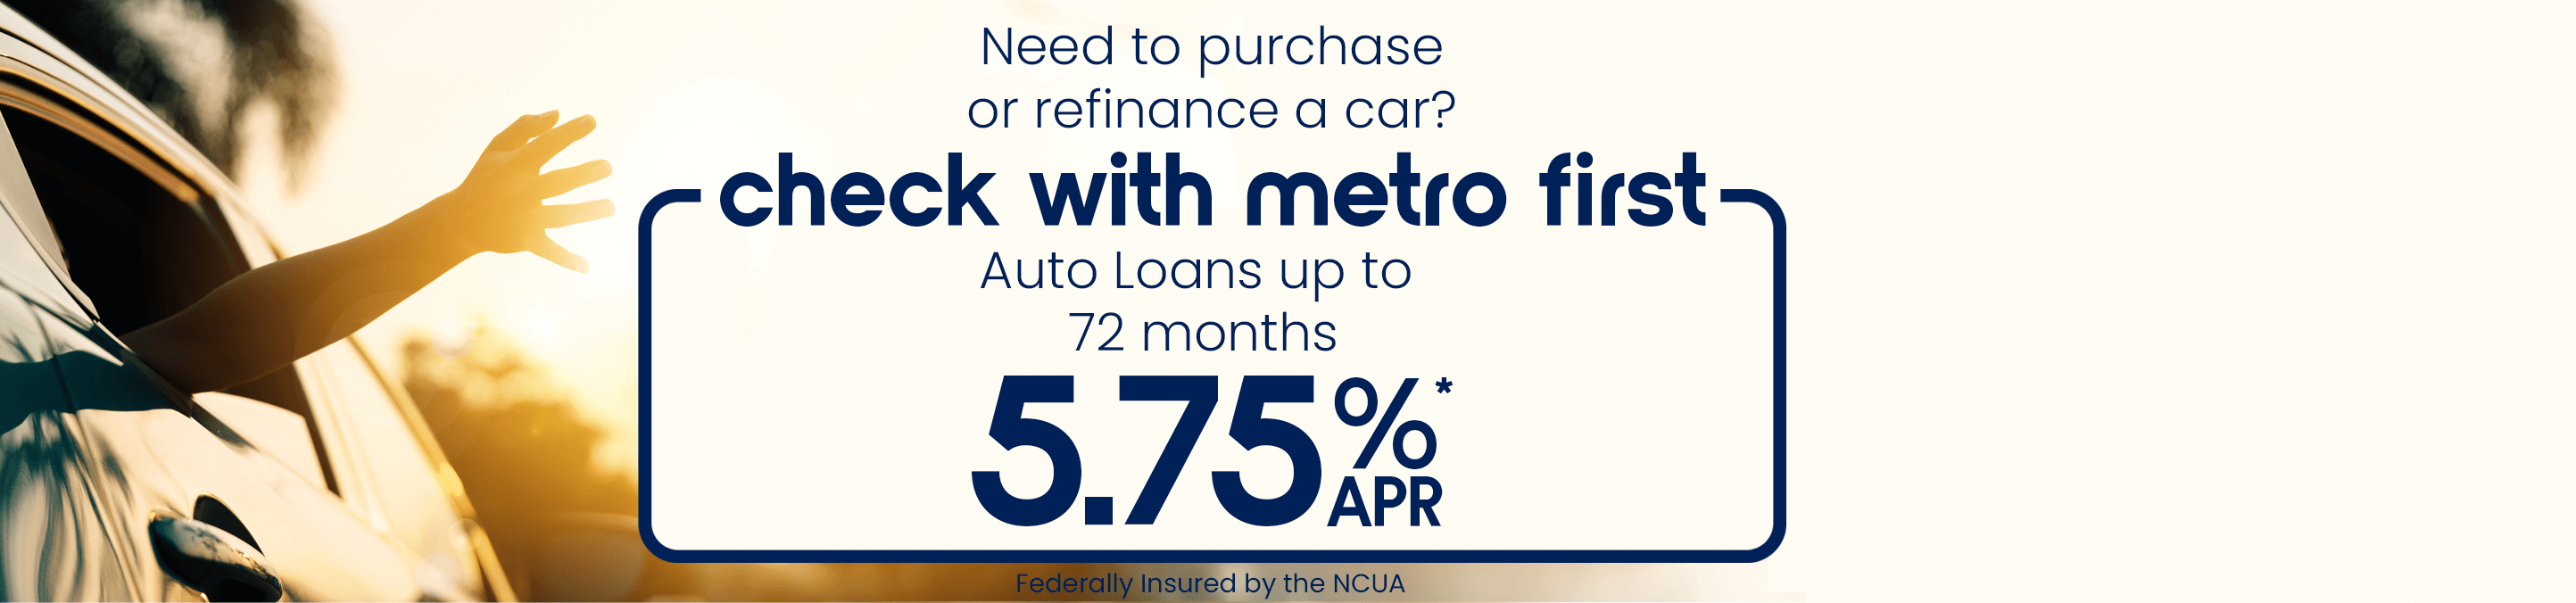 Need to purchase or refinance a car? Check with Metro first!